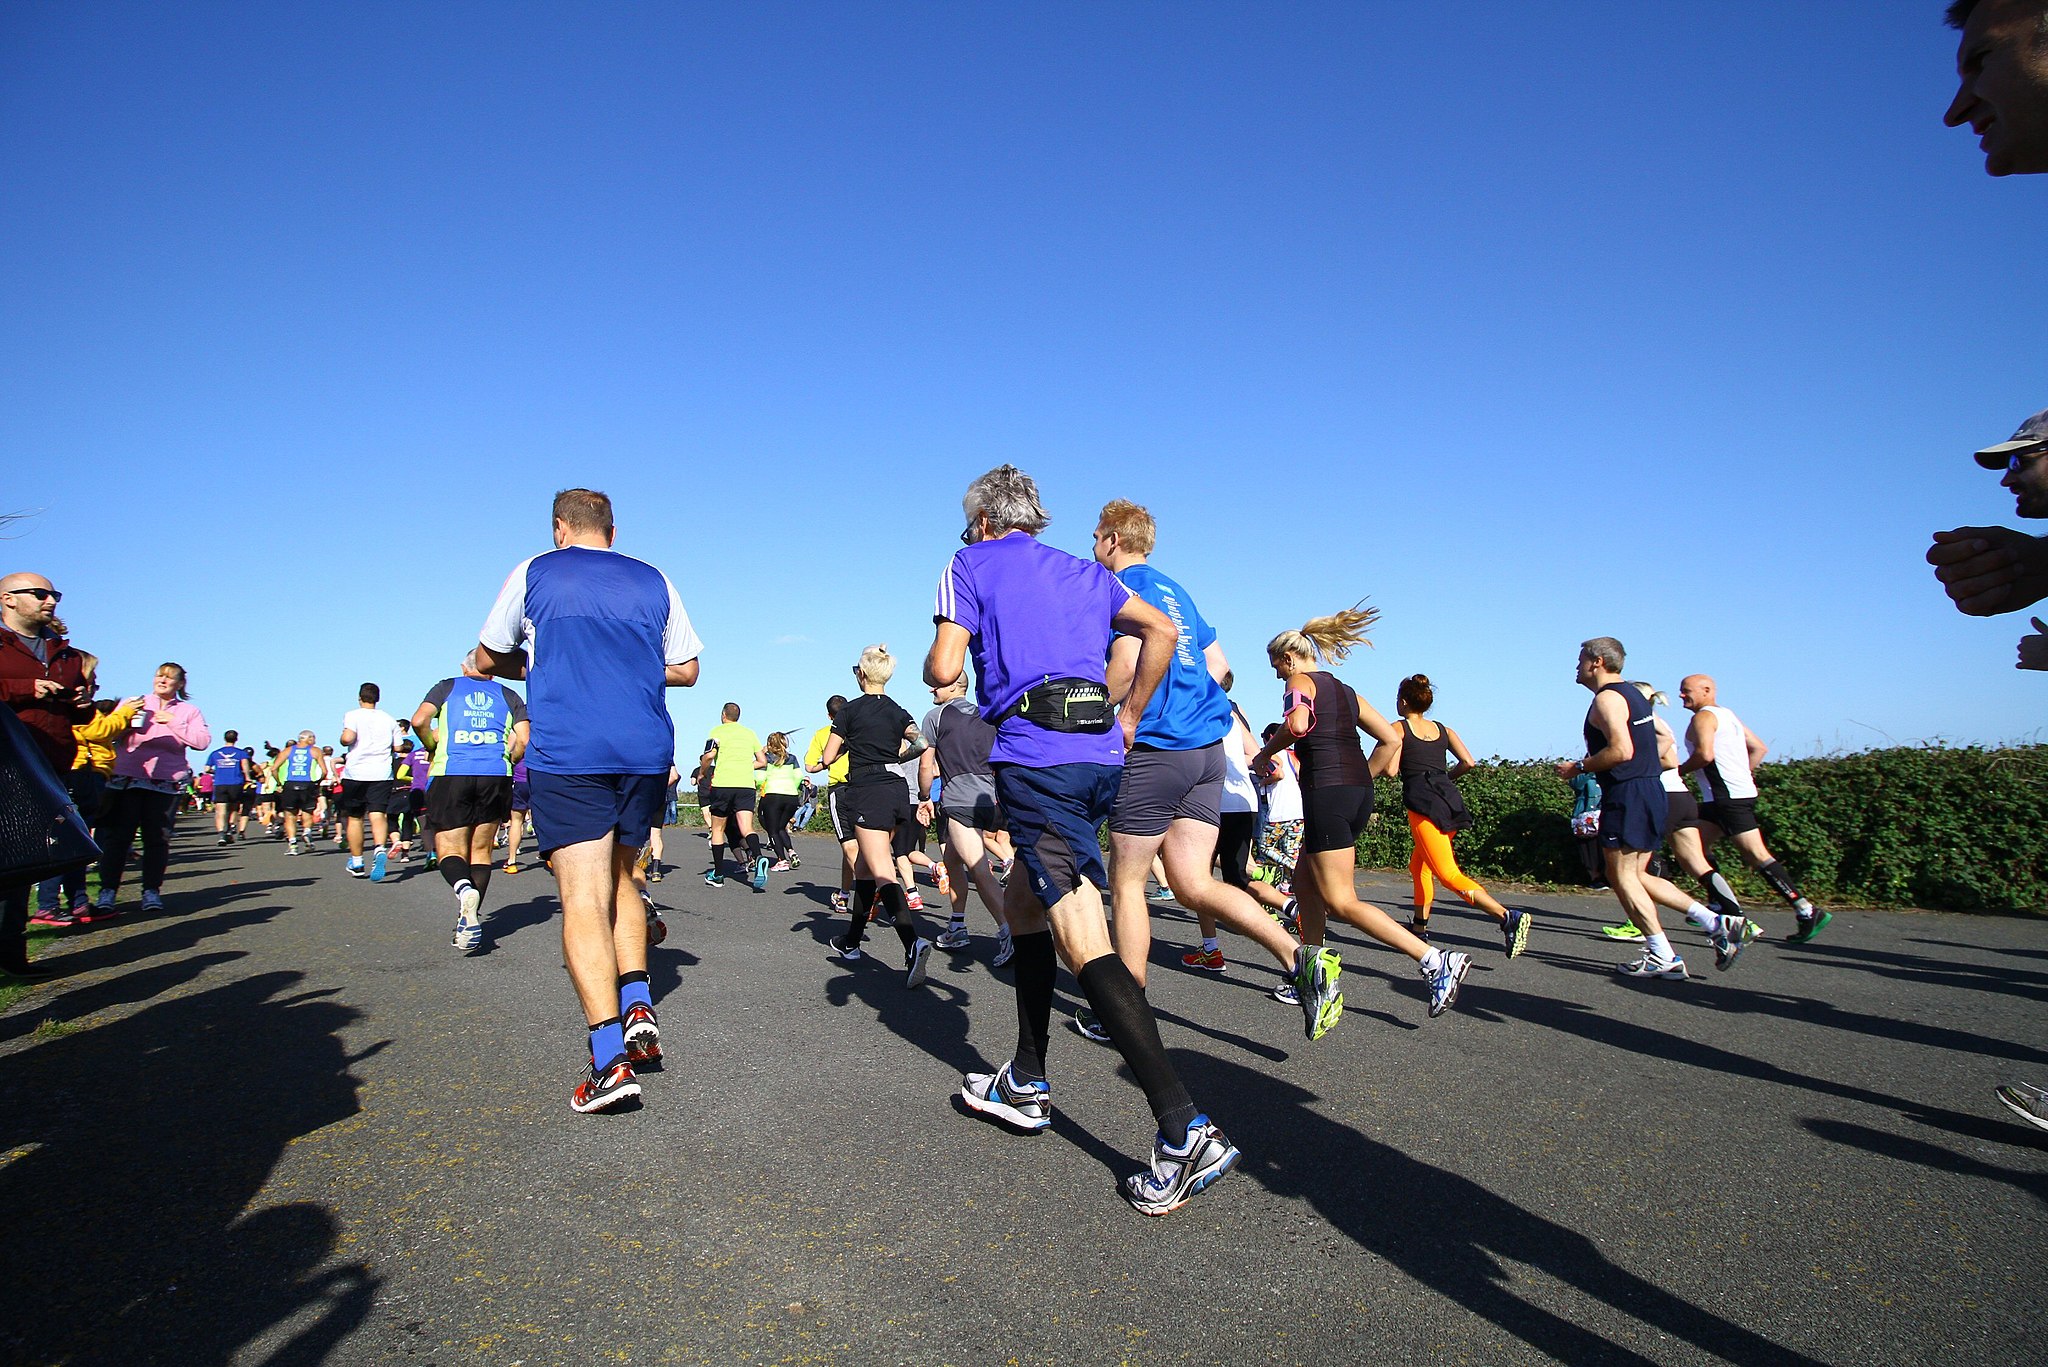 A marathon race in Kent. People running away from the camera. The sky is really blue.